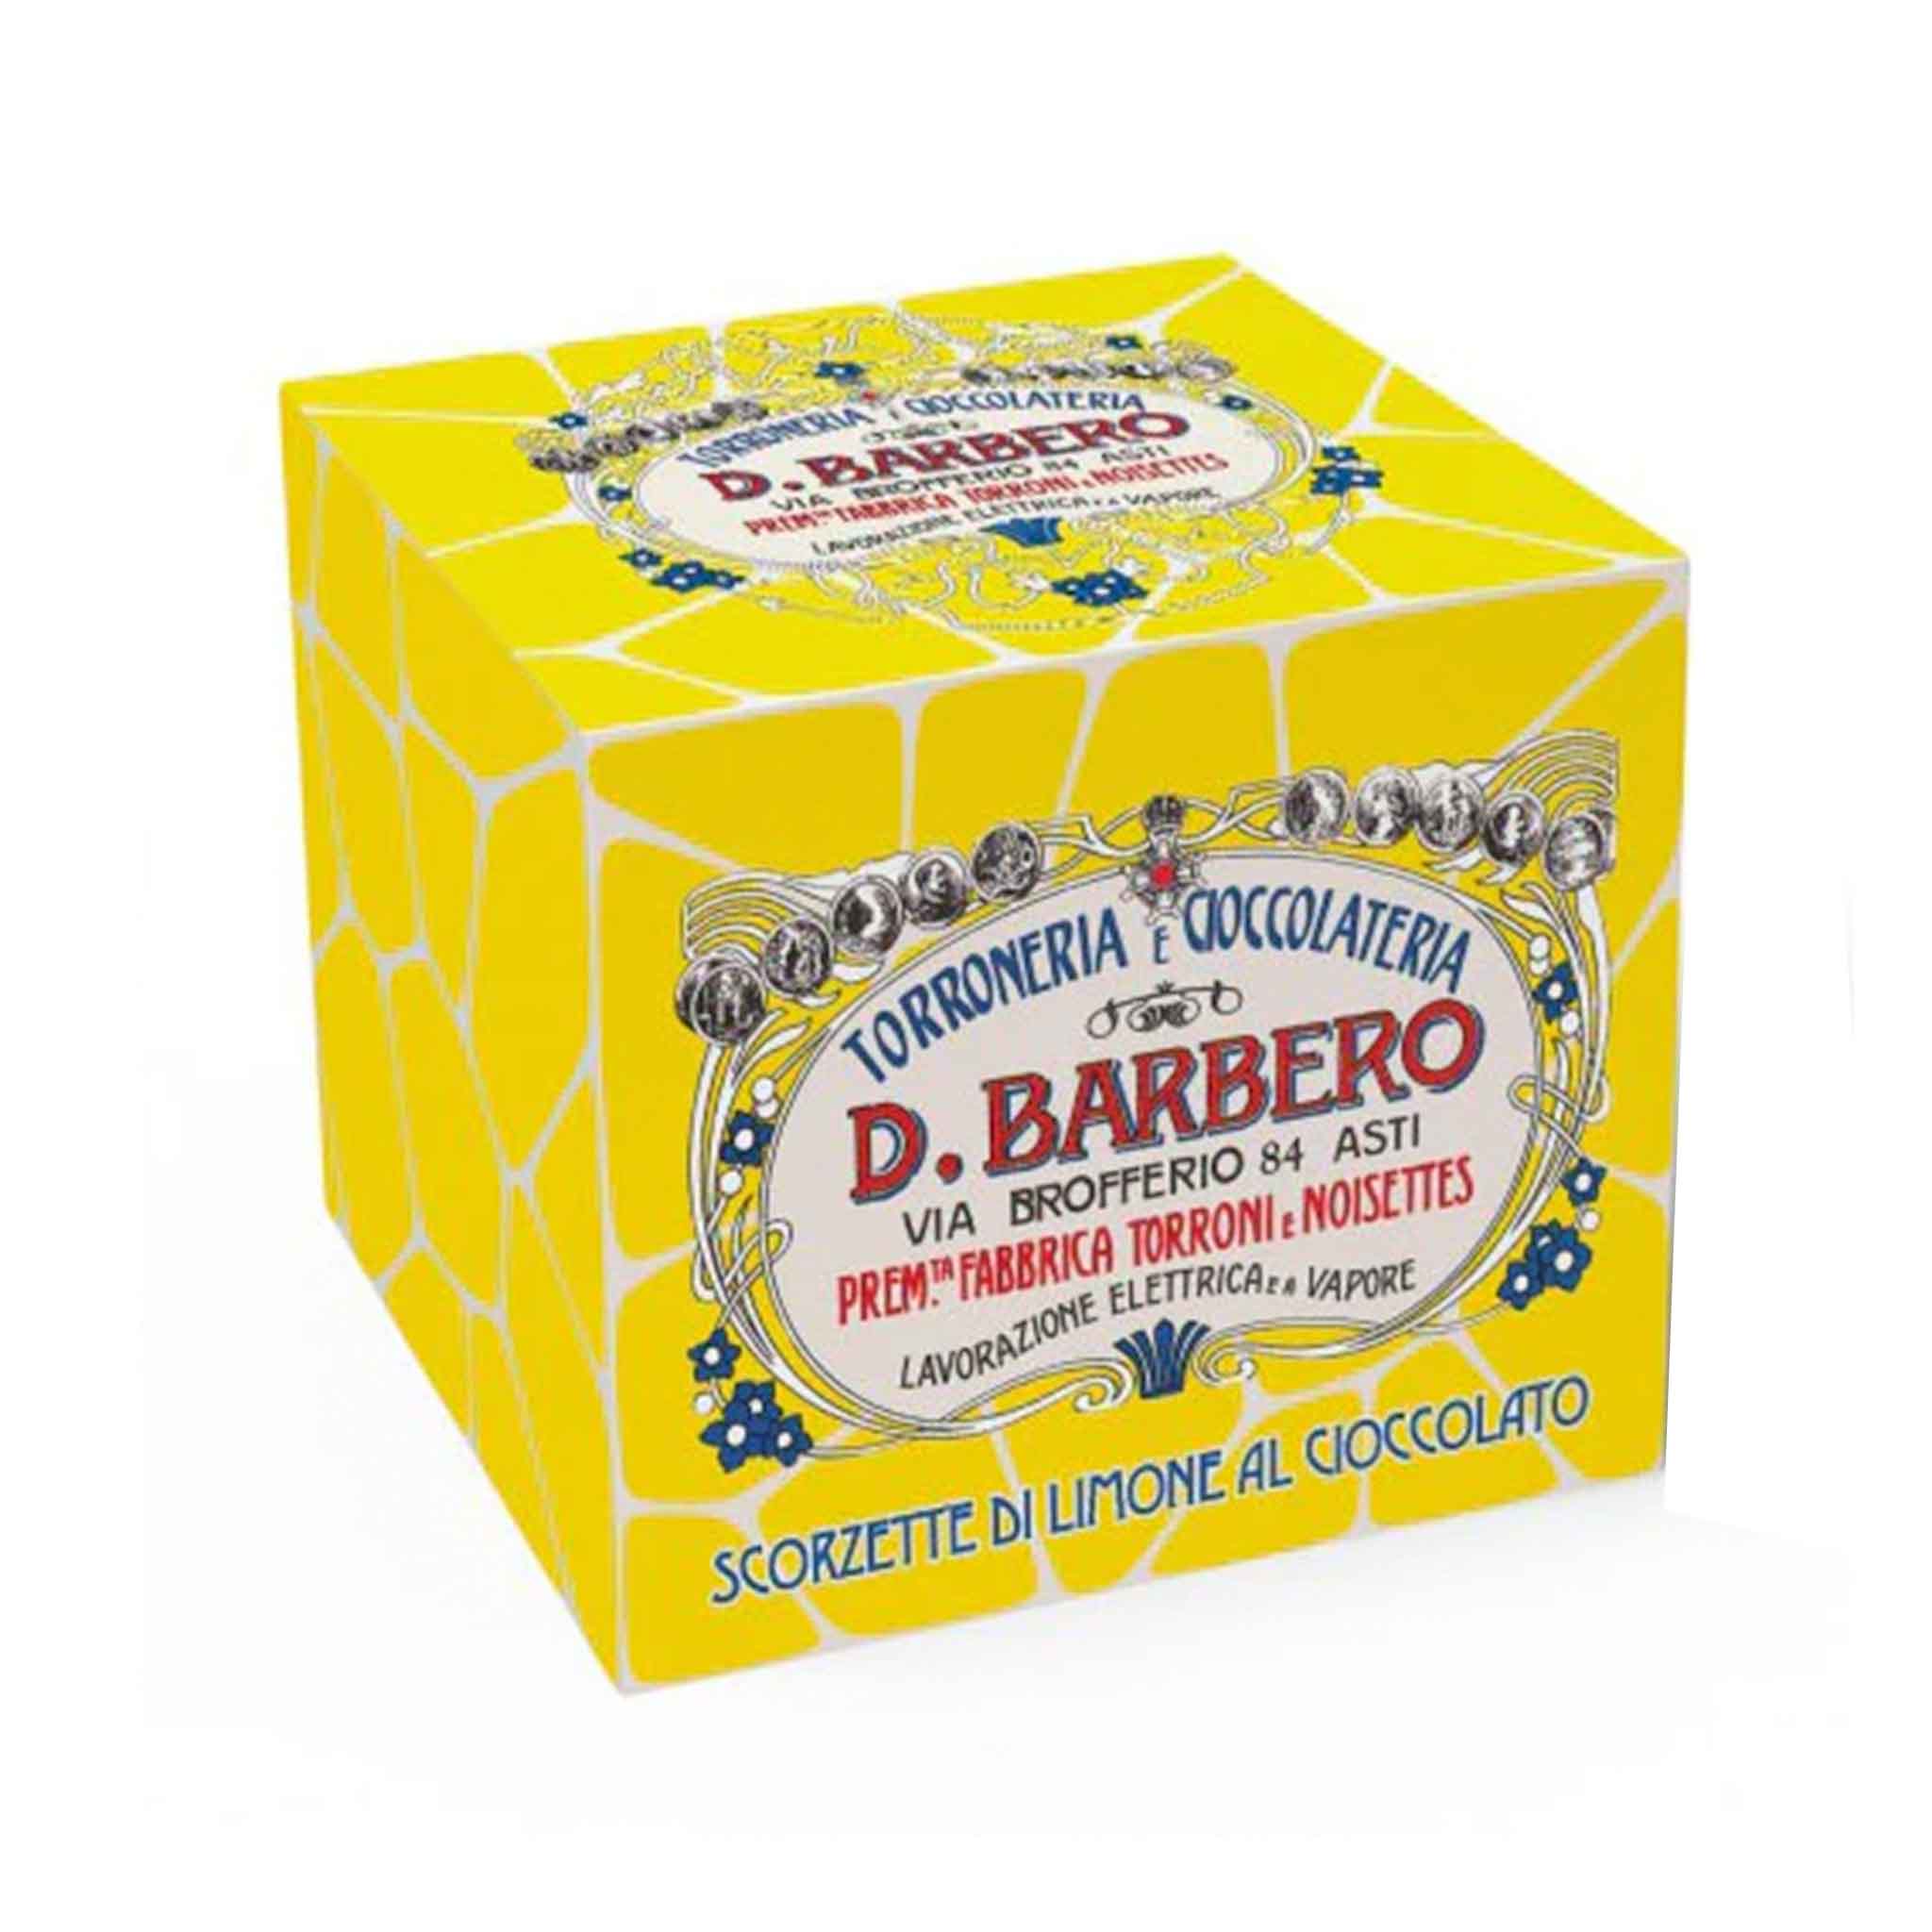 D. BARBERO CANDIED LEMON COVERED IN DARK CHOCOLATE 150g